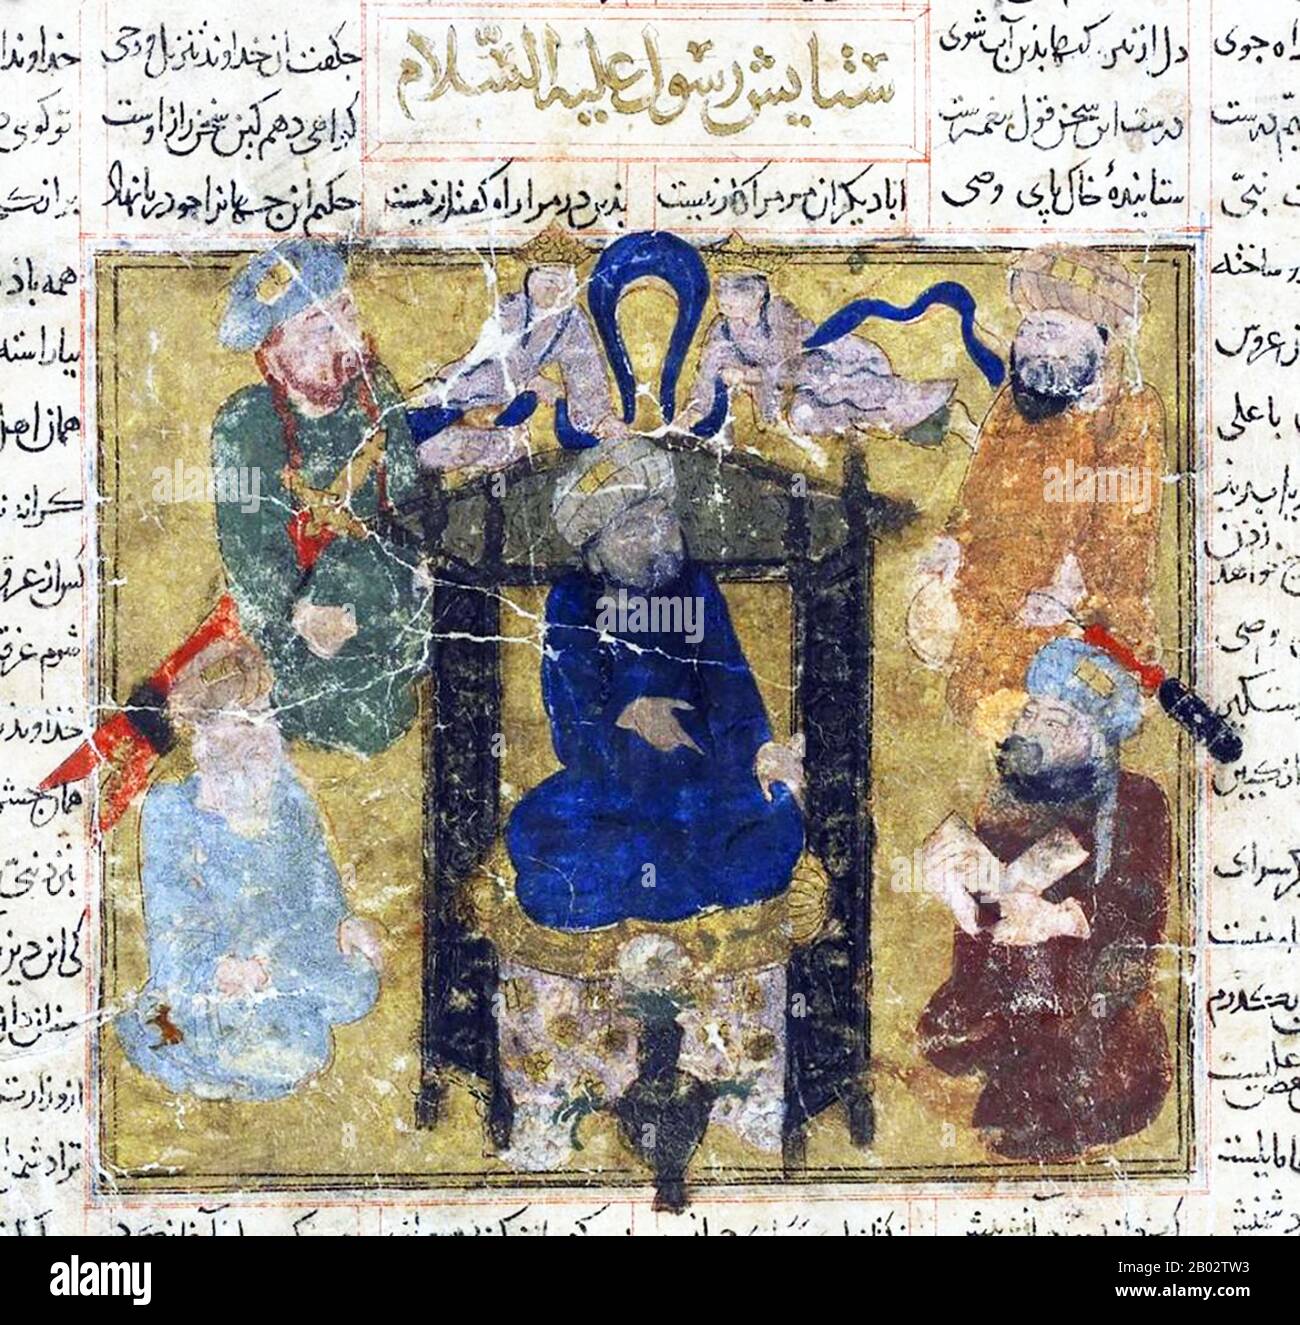 Representations of the Prophet Muhammad are controversial, and generally forbidden in Sunni Islam (especially Hanafiyya, Wahabi, Salafiyya).  Shia Islam and some other branches of Sunni Islam (Hanbali, Maliki, Shafi'i) are generally more tolerant of such representational images, but even so the Prophet's features are generally veiled or concealed by flames as a mark of deep respect. Stock Photo